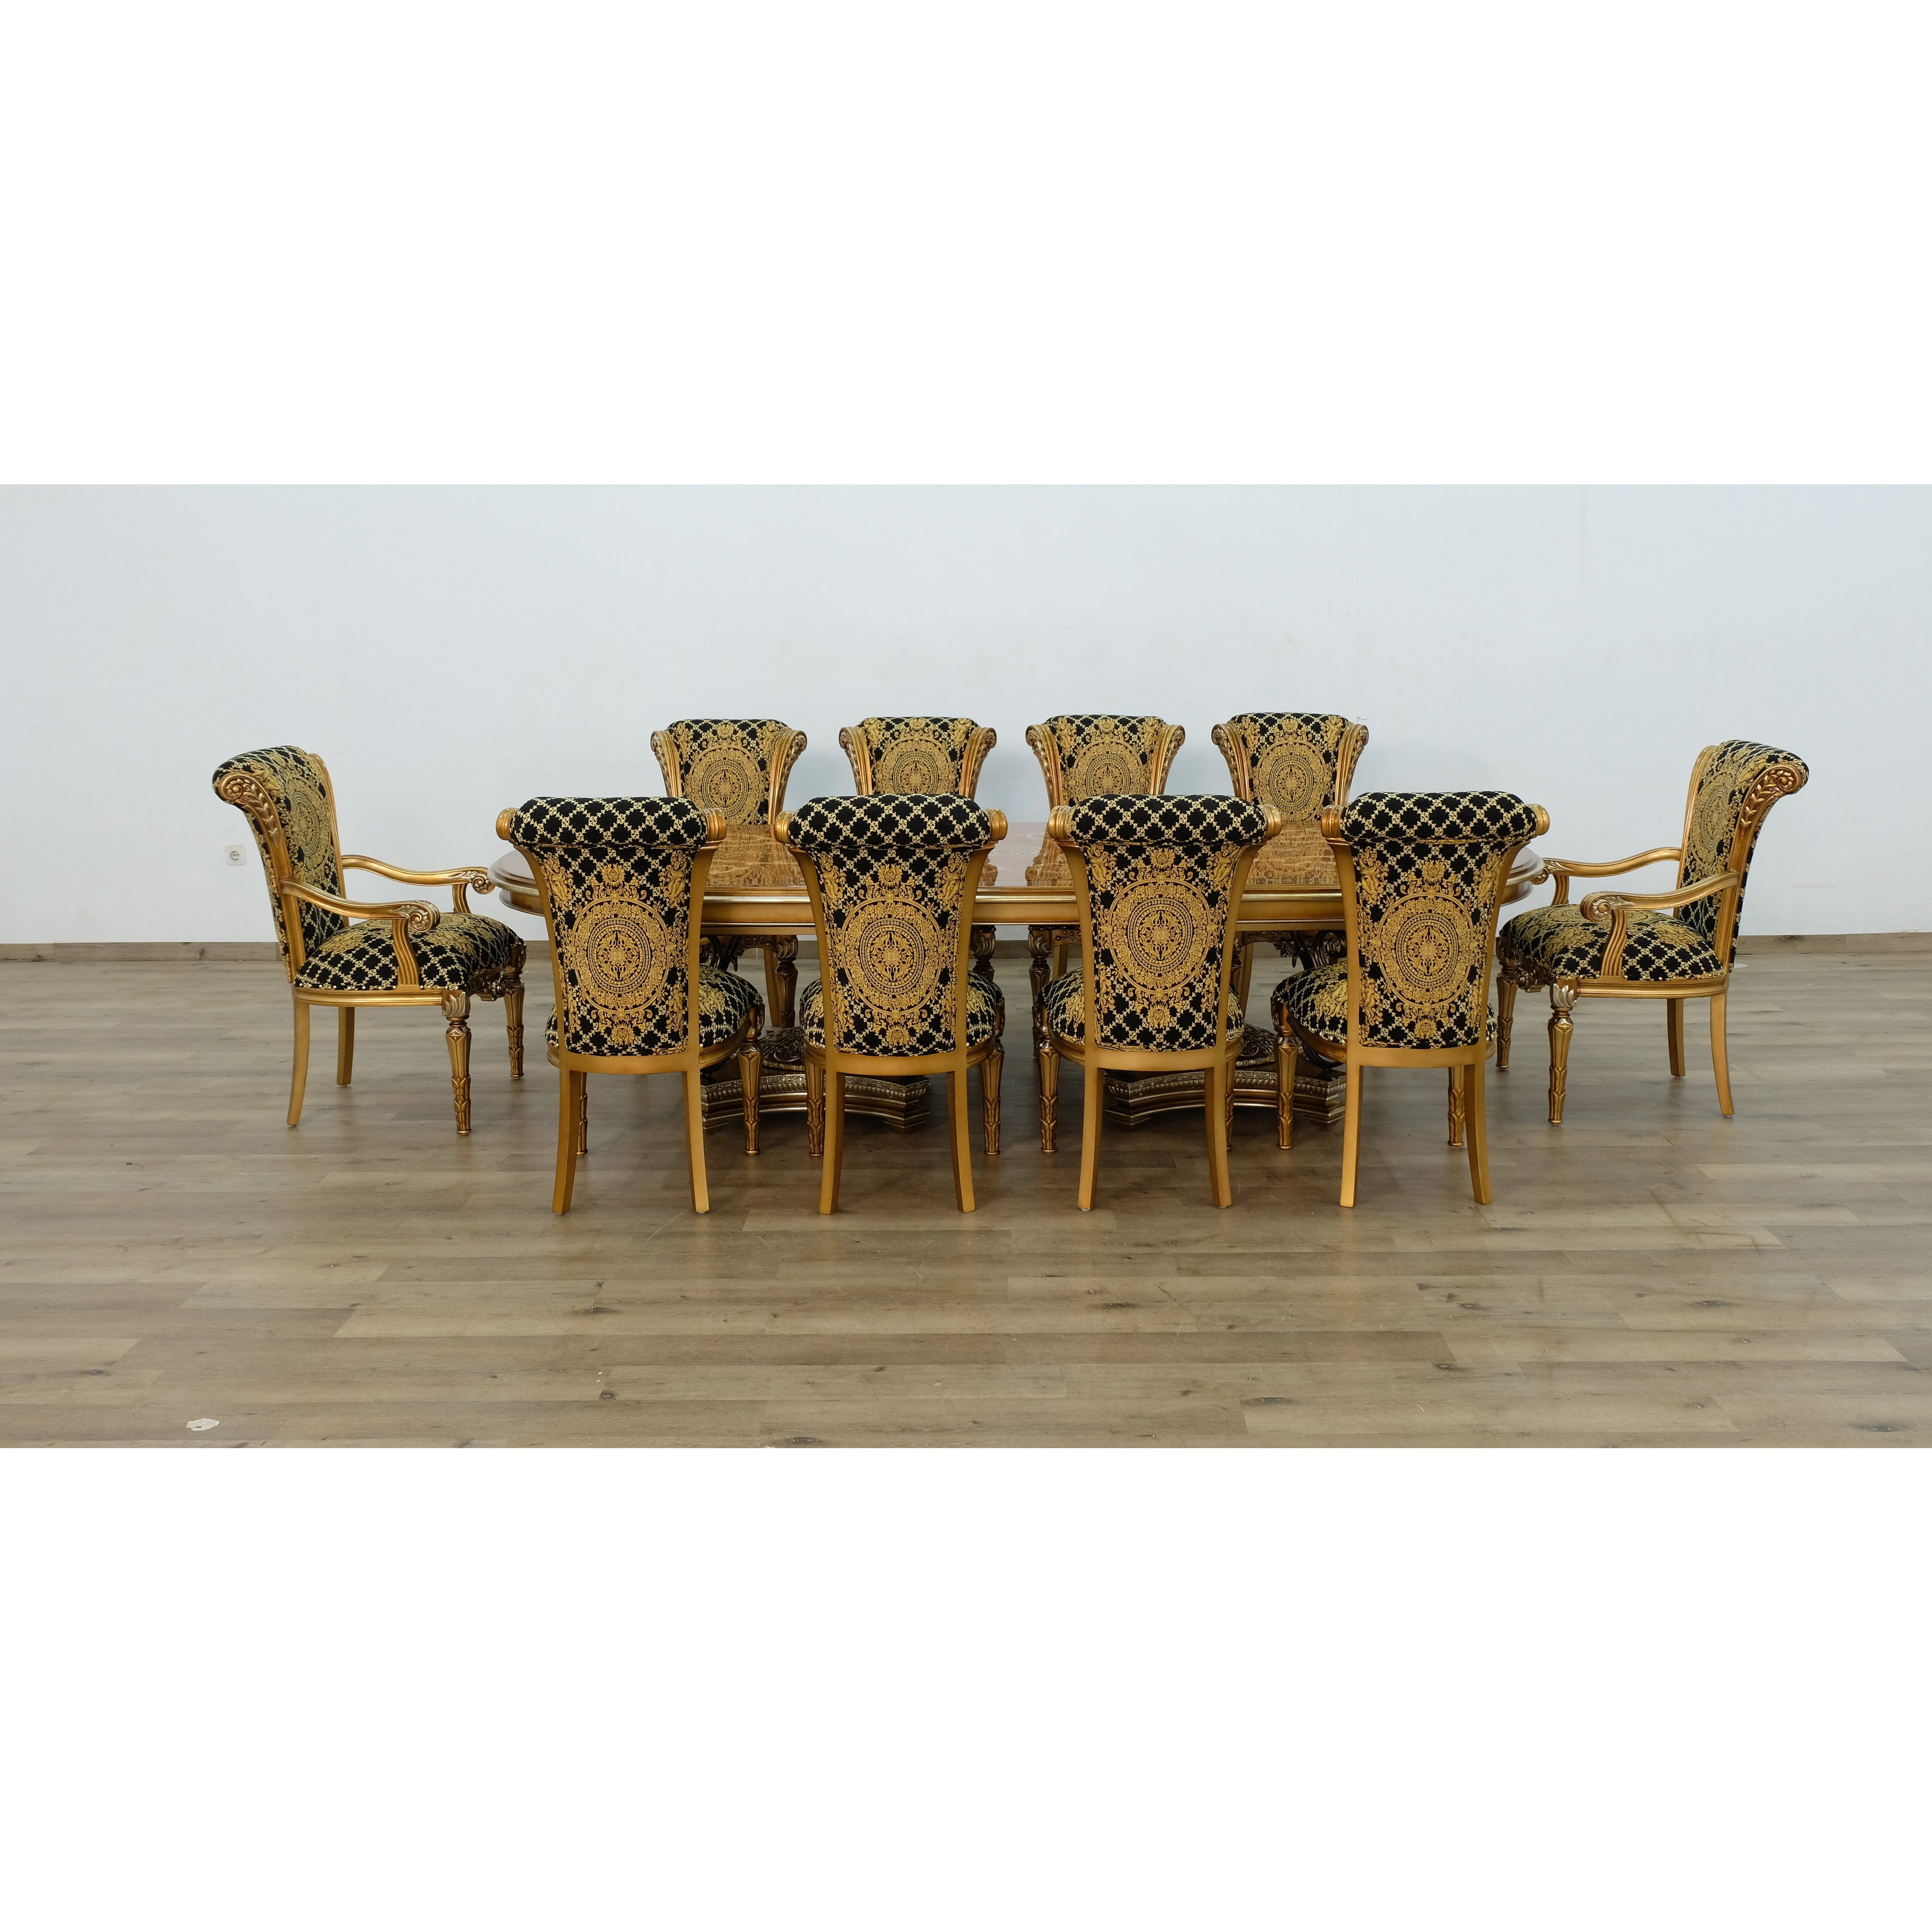 European Furniture - Valentina 11 Piece Dining Room Set With Gold Black Chair - 51955-61958-11SET - New Star Living